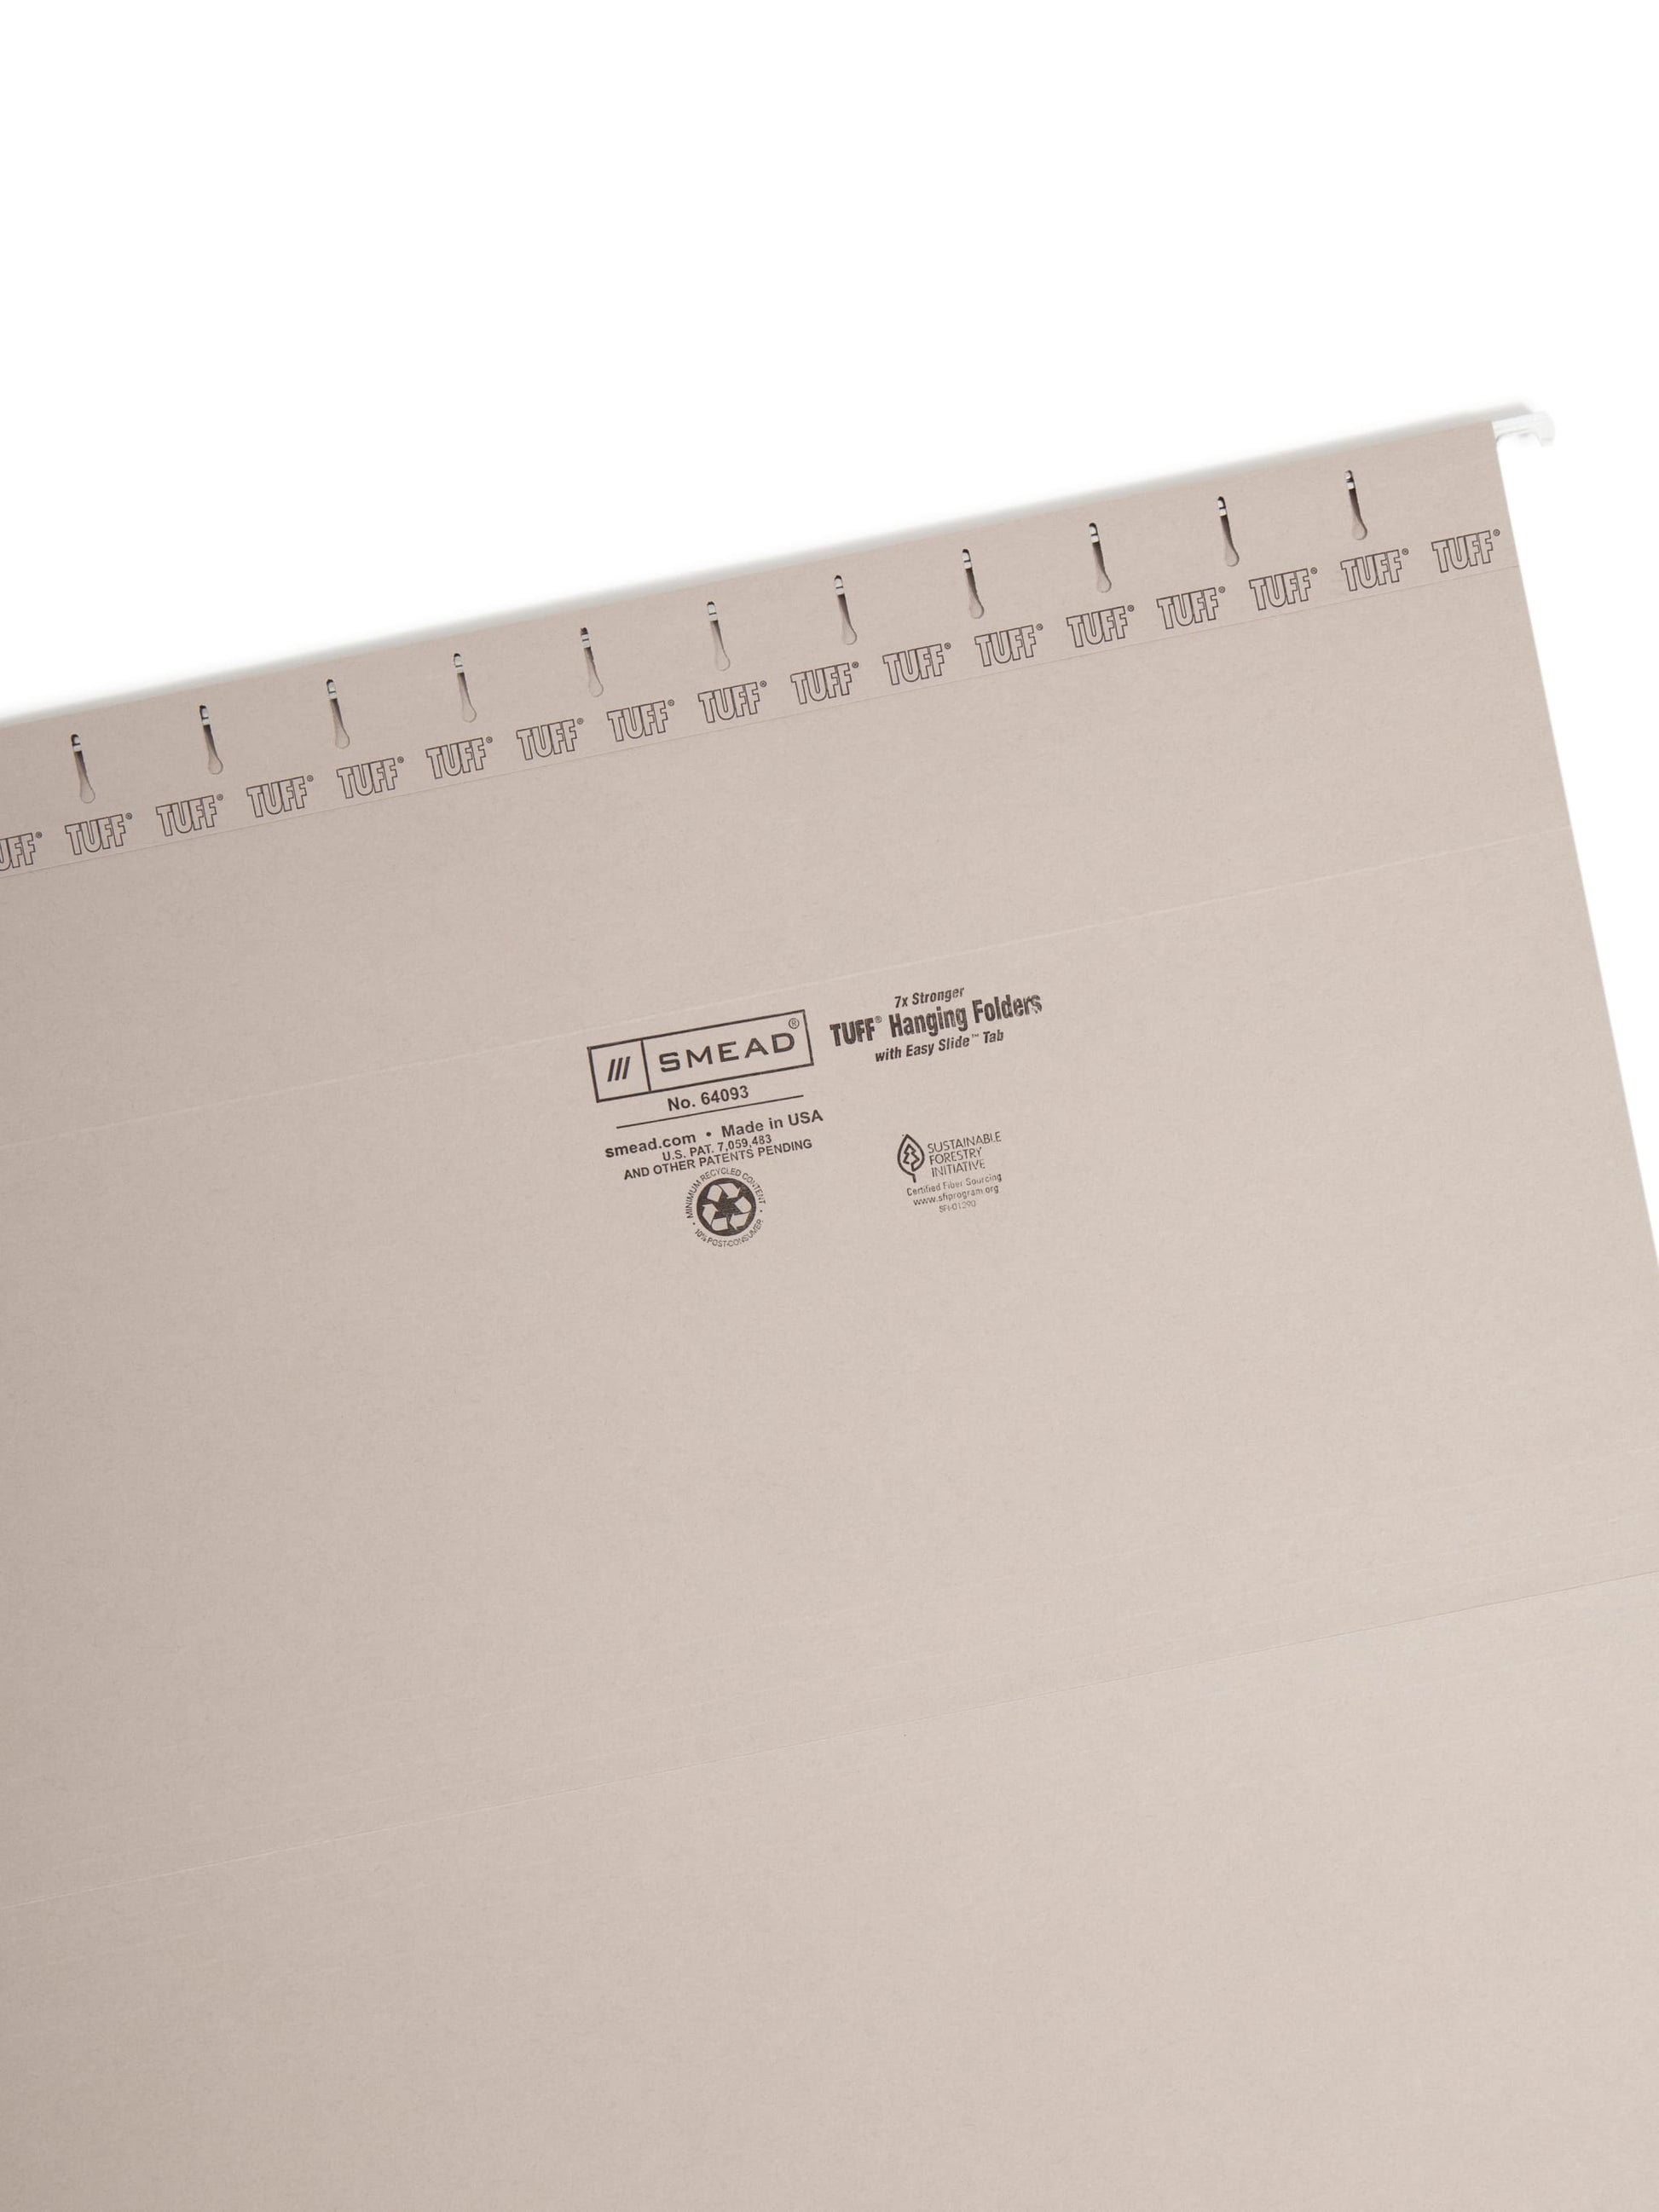 TUFF® Hanging File Folders with Easy Slide® Tabs, Gray Color, Legal Size, Set of 18, 086486640930